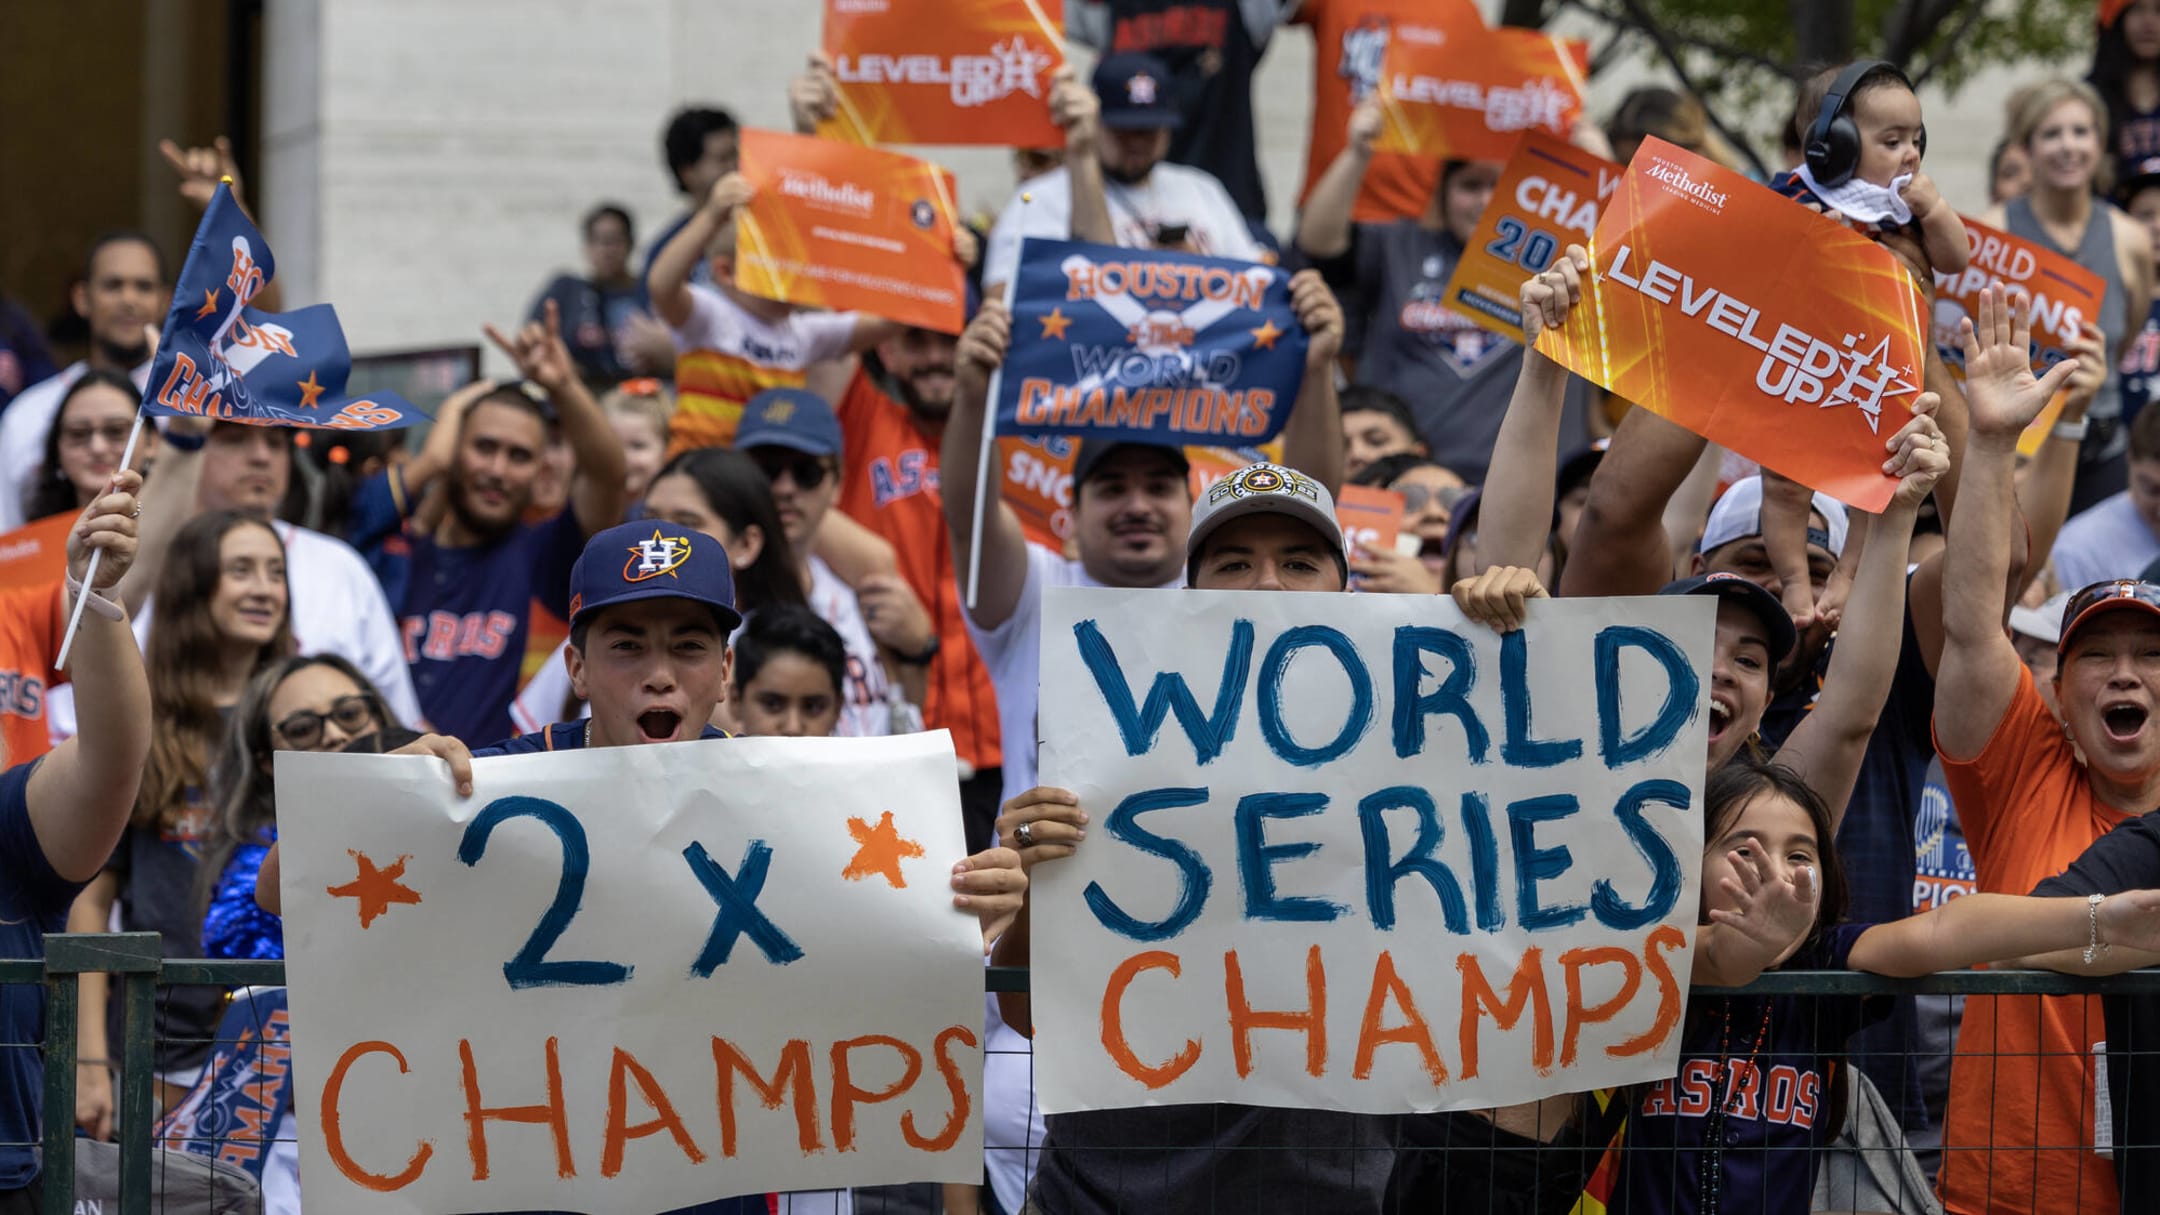 We want Houston': Phillies fans' Astros chant before World Series